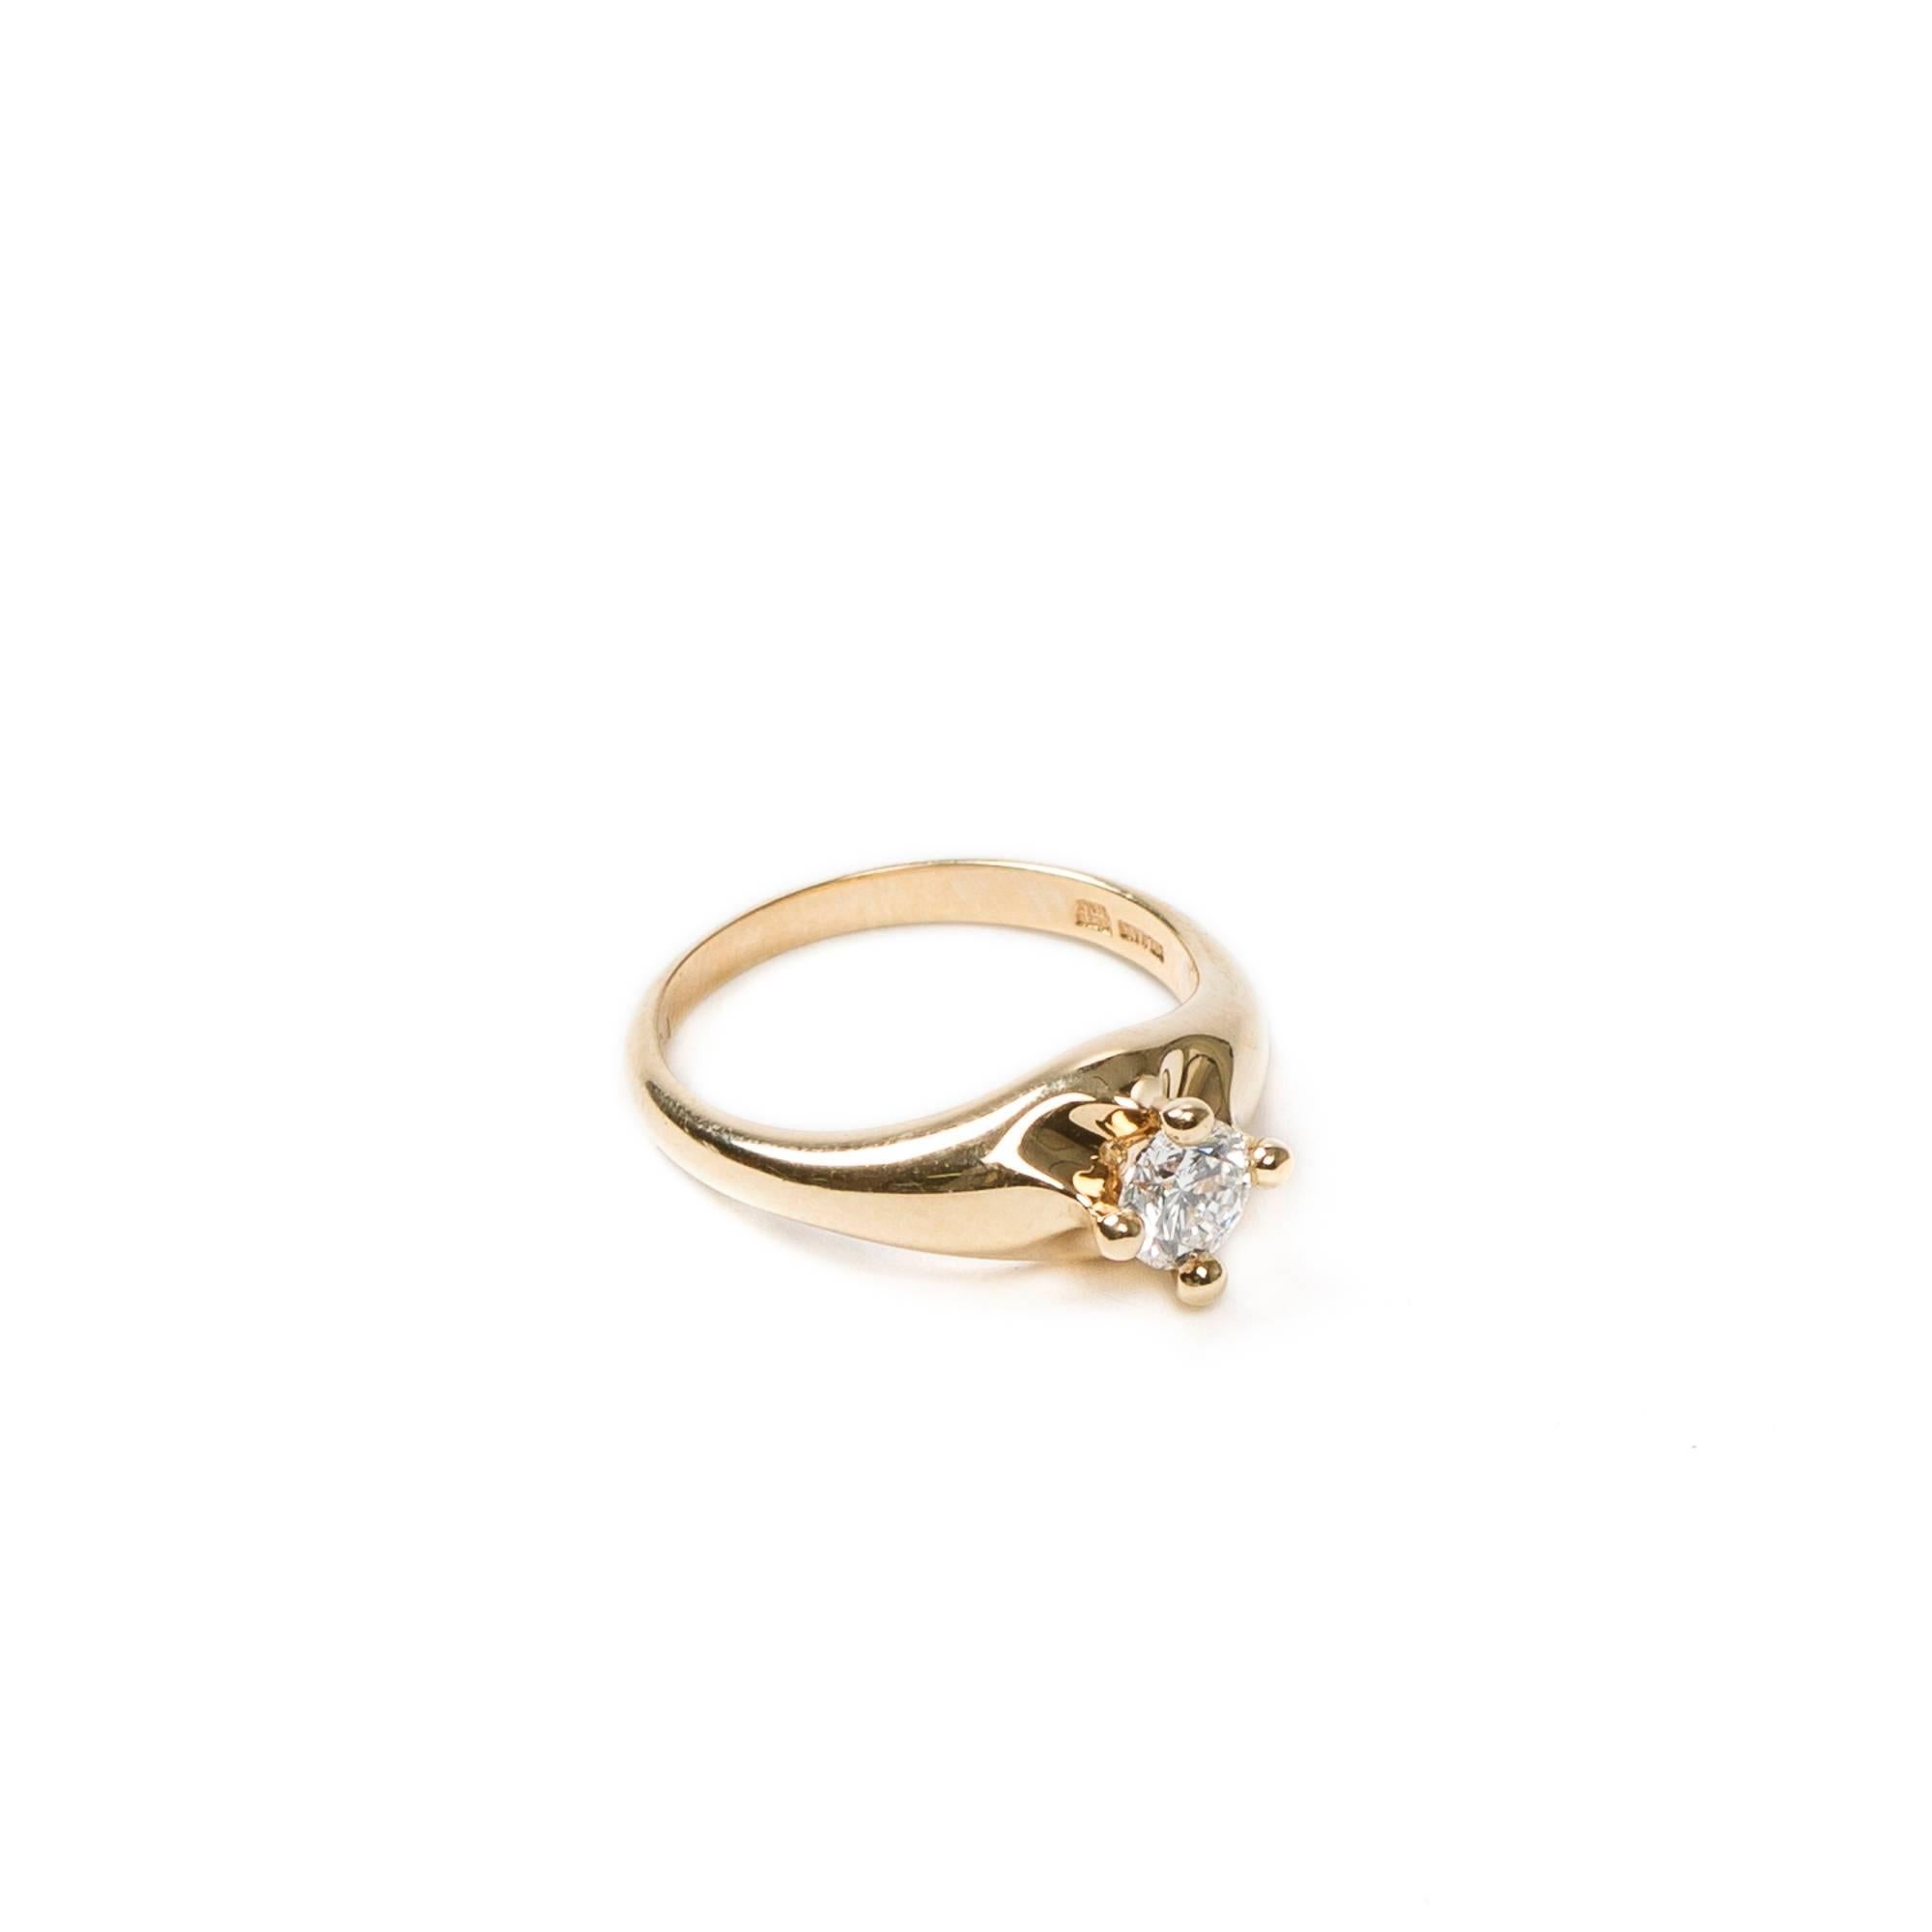 Corona Solitaire ring in 750 yellow gold with a 0.423ct diamond Color:E Clarity:VVS2. Hallmarks inside the ring 